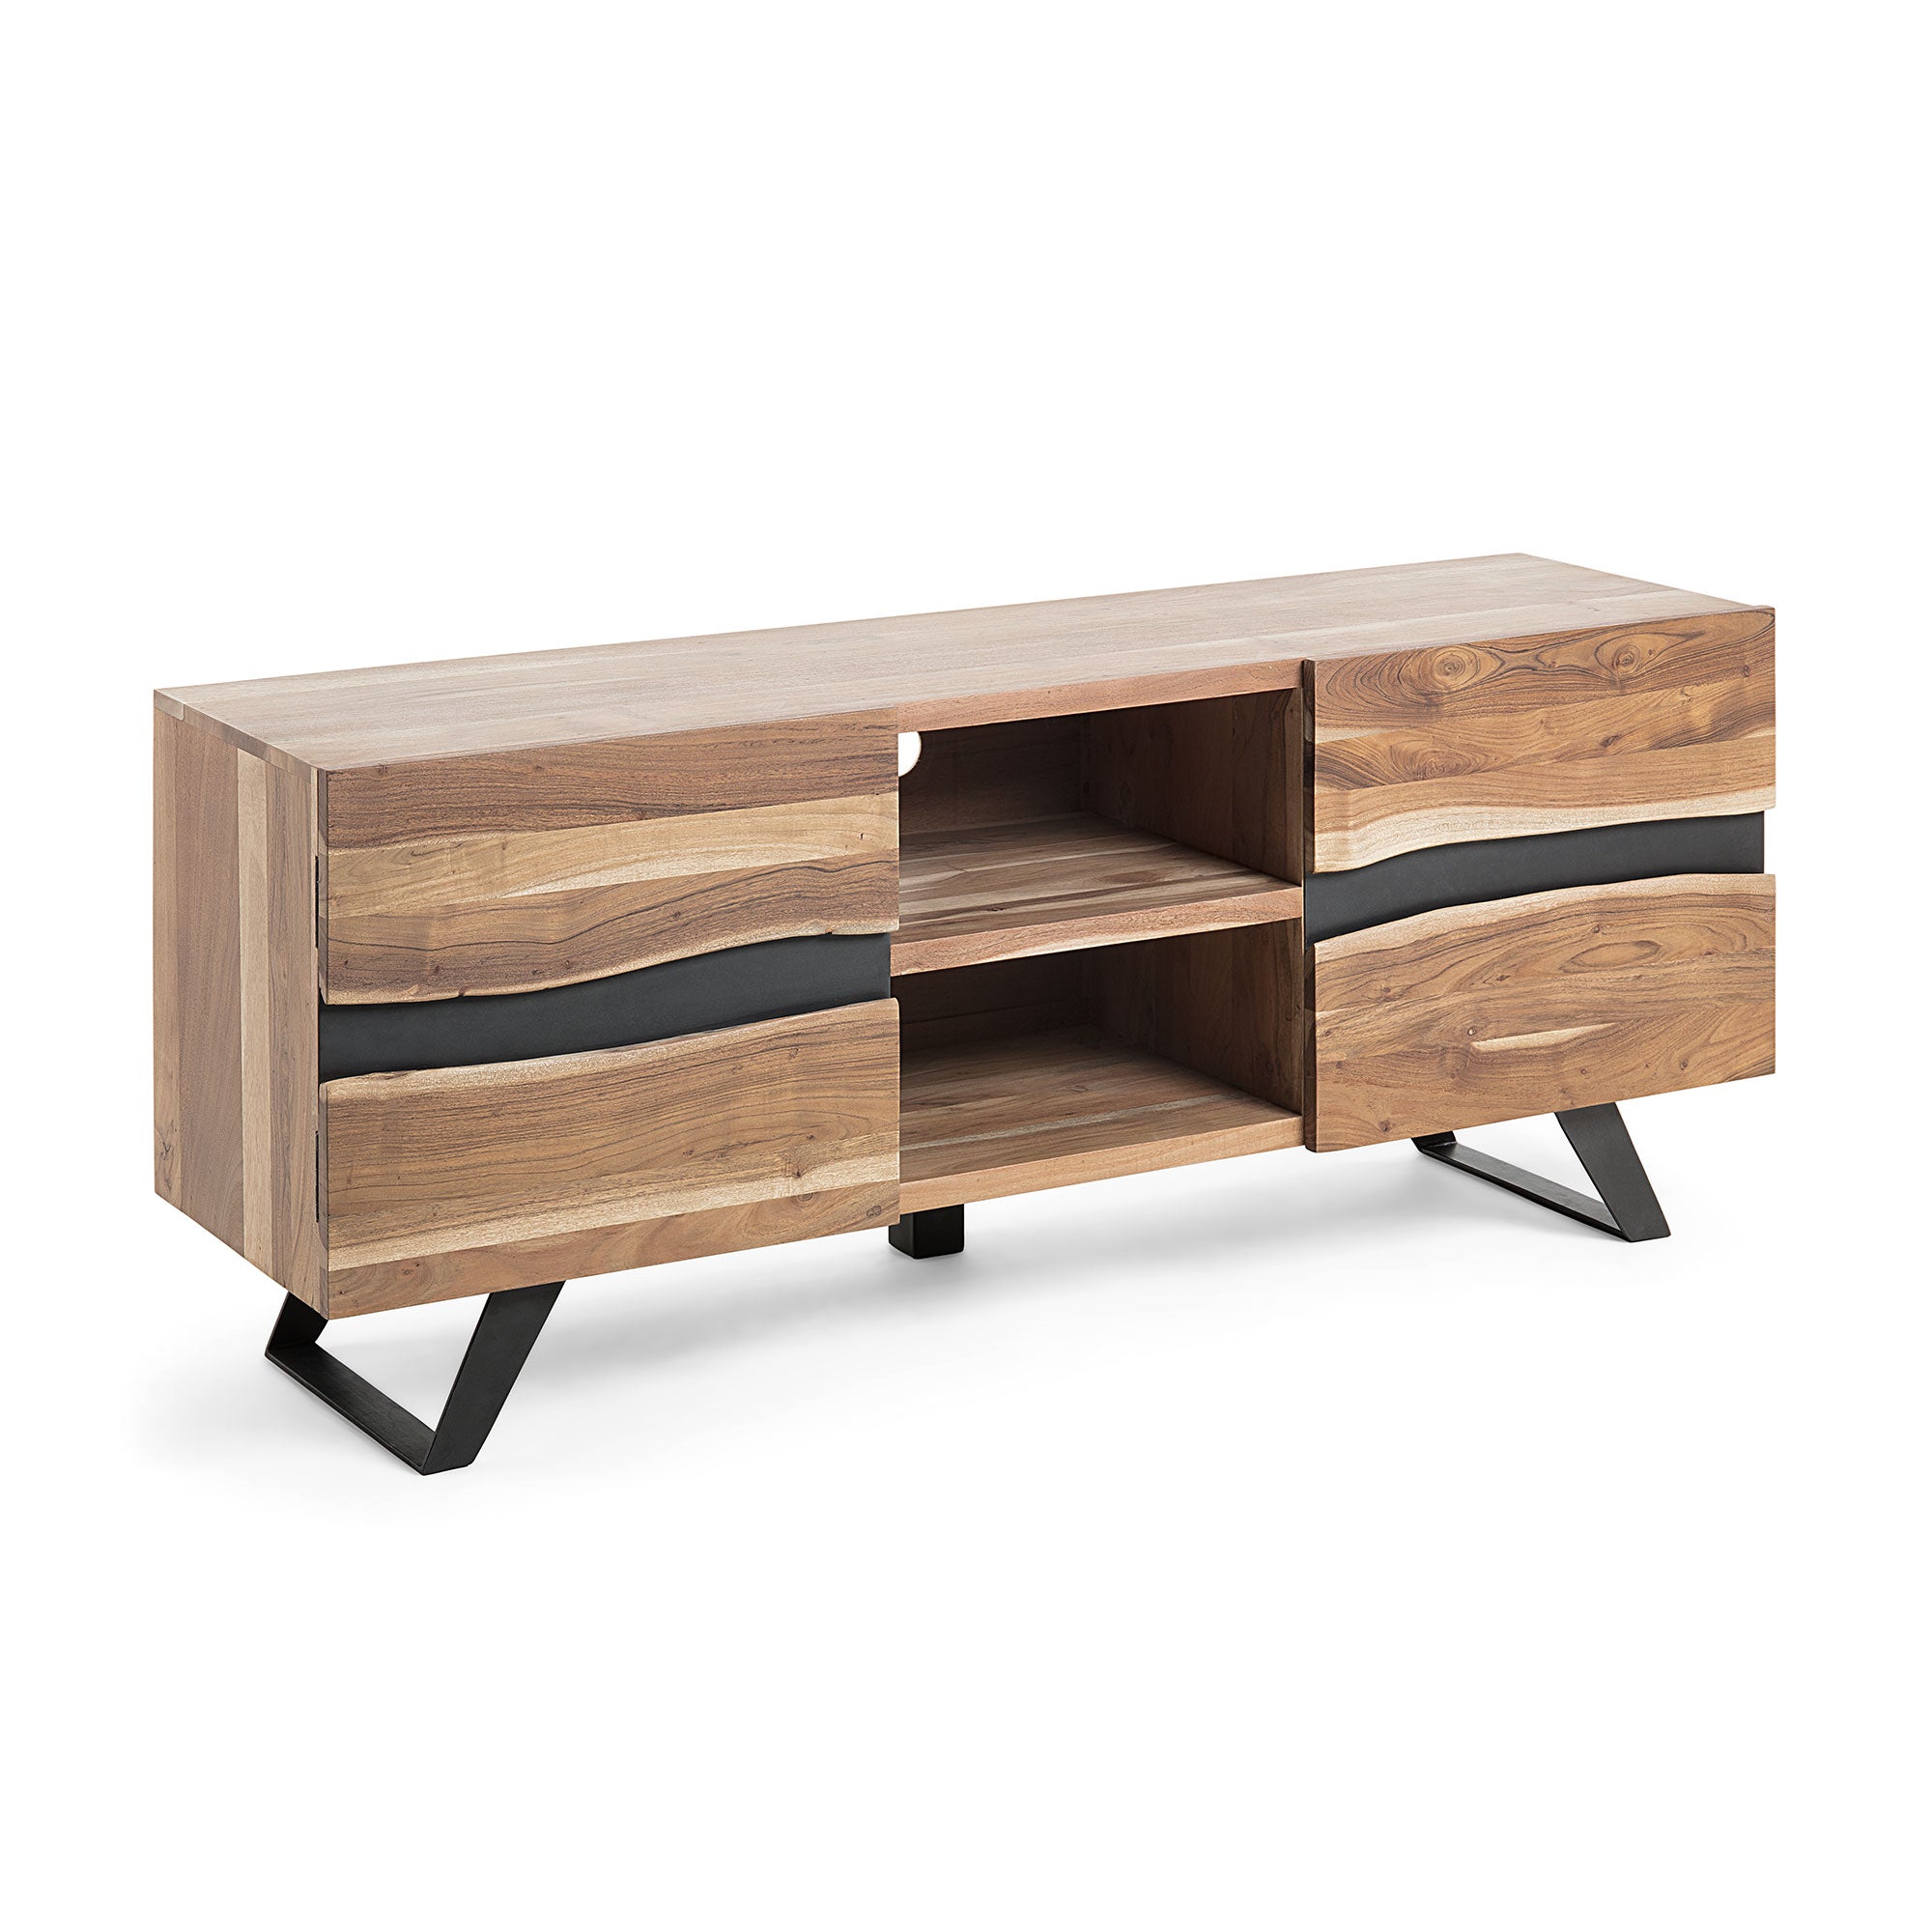 Uxia solid acacia wood TV stand with 2 doors and black finish steel, 160 x 65 cm